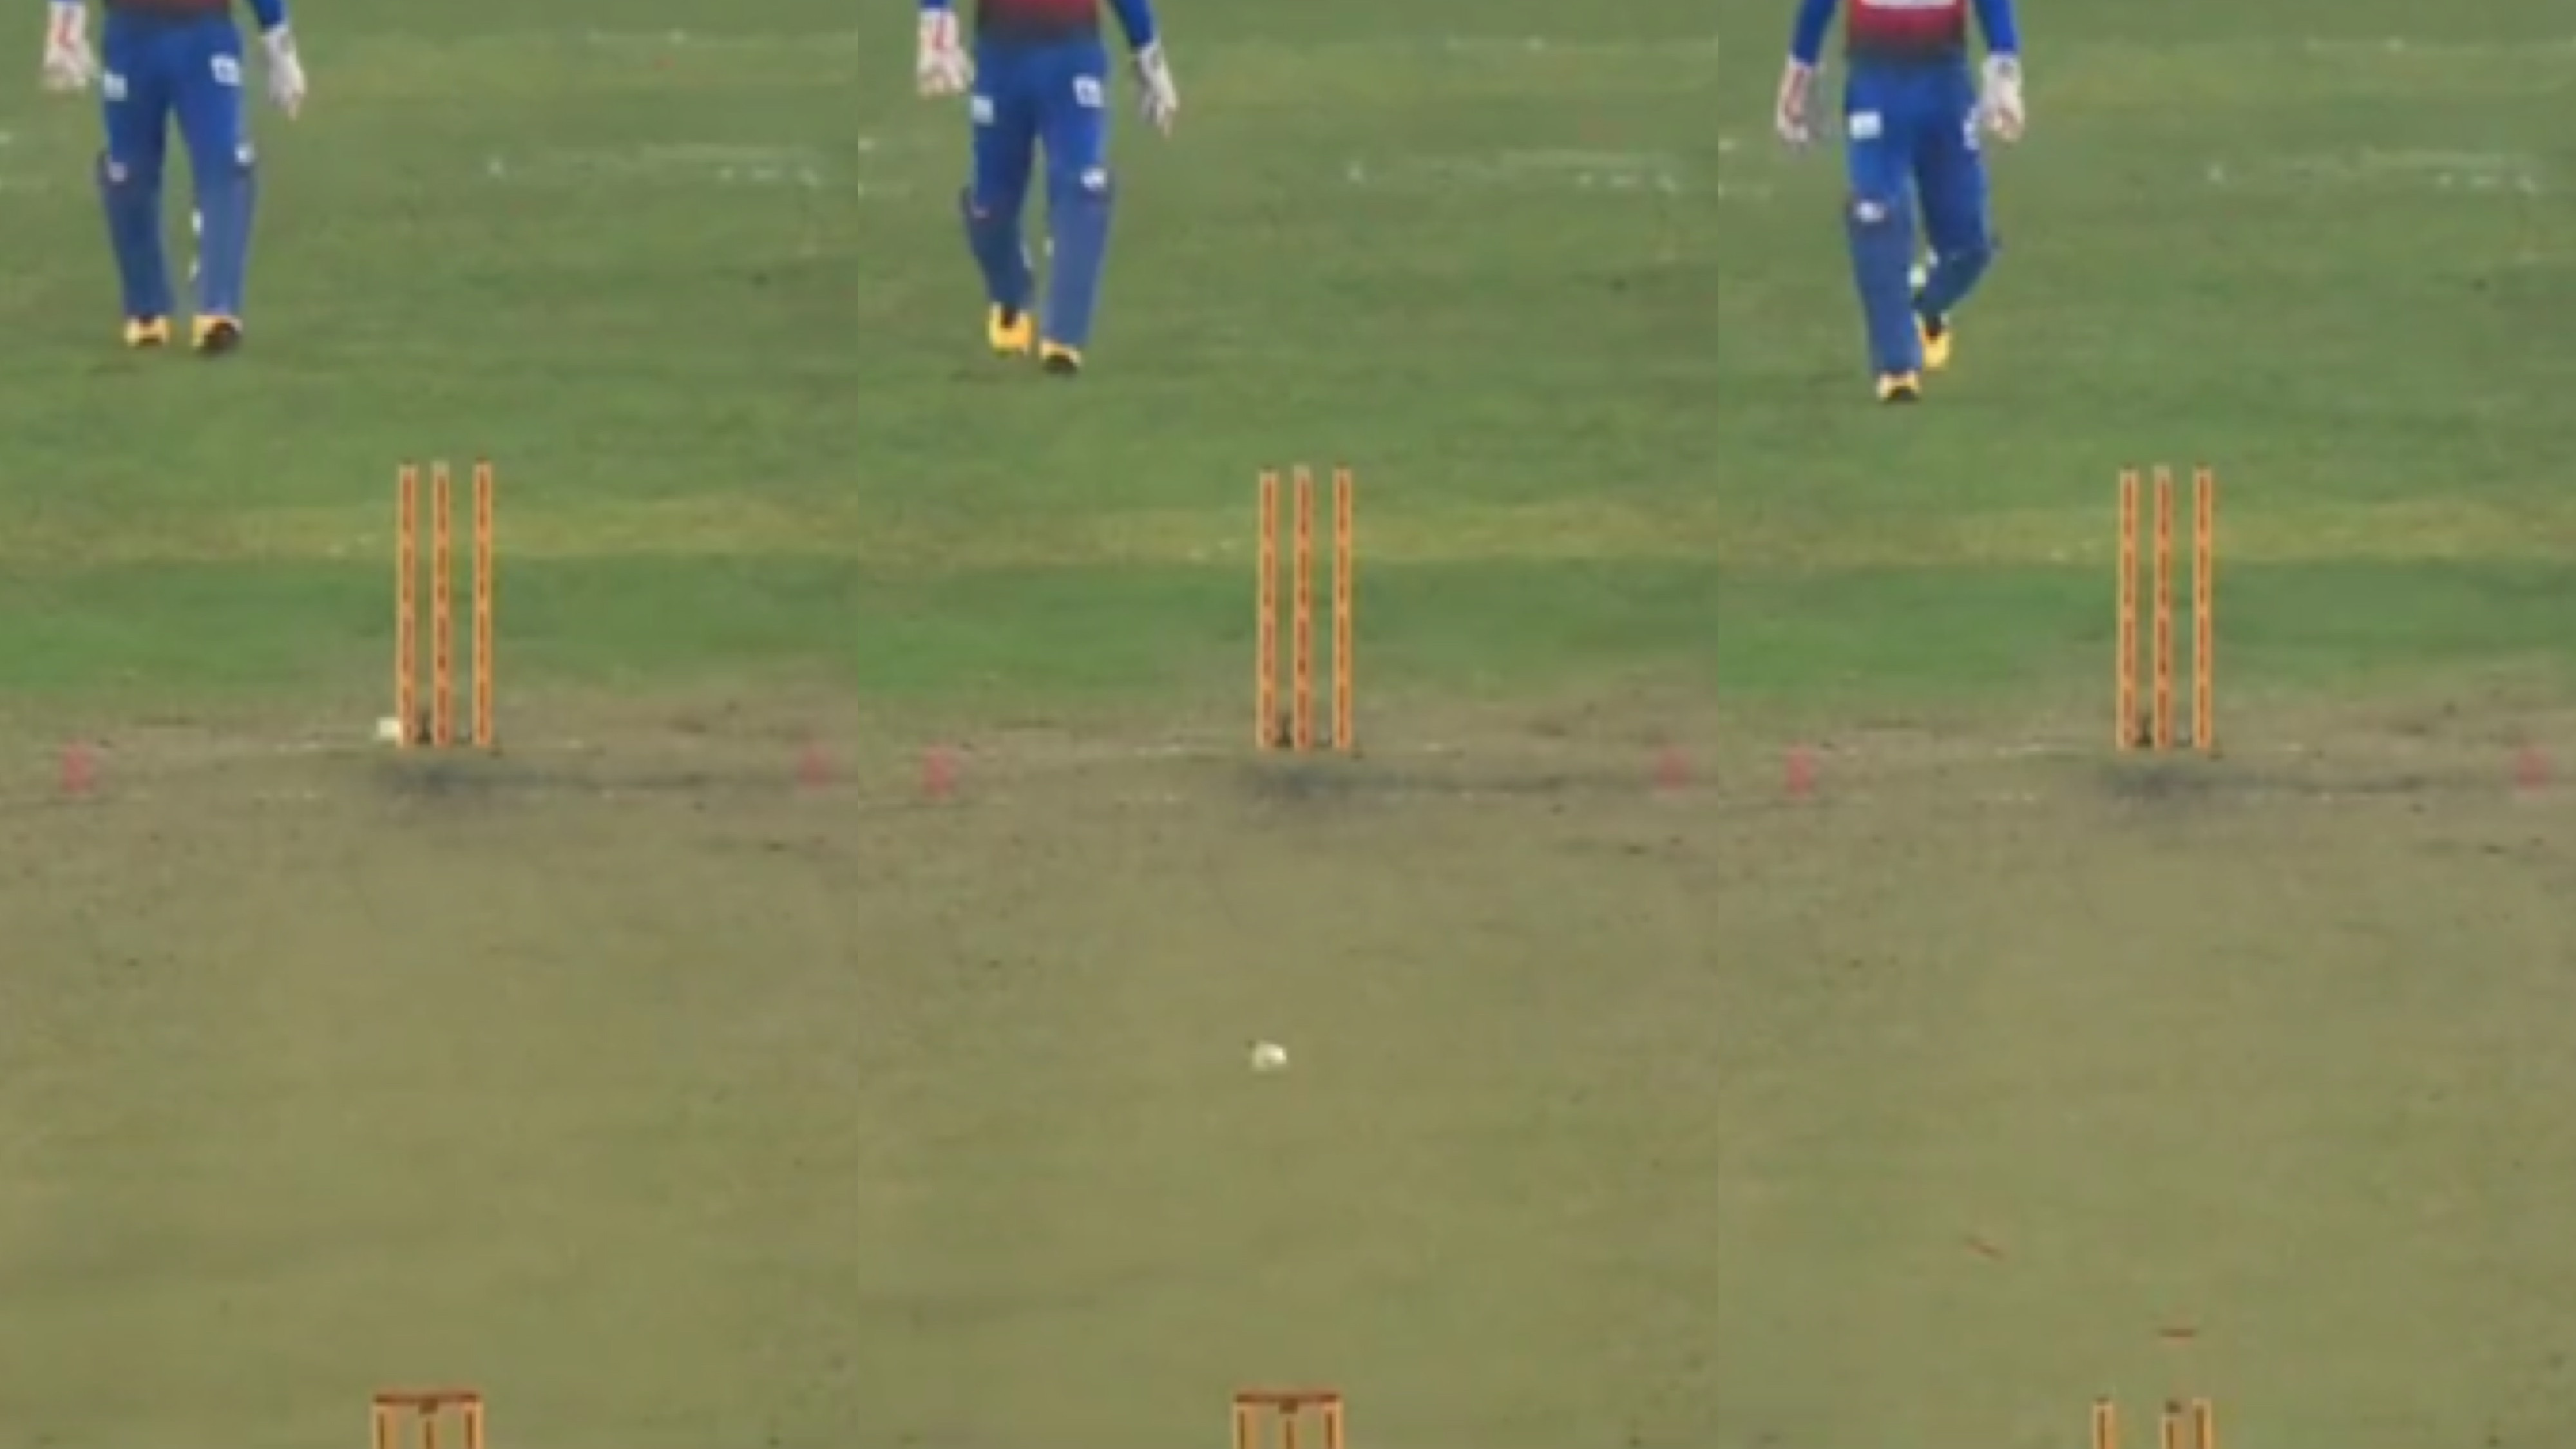 BPL 2022: WATCH - Andre Russell gets run out in the most bizarre fashion